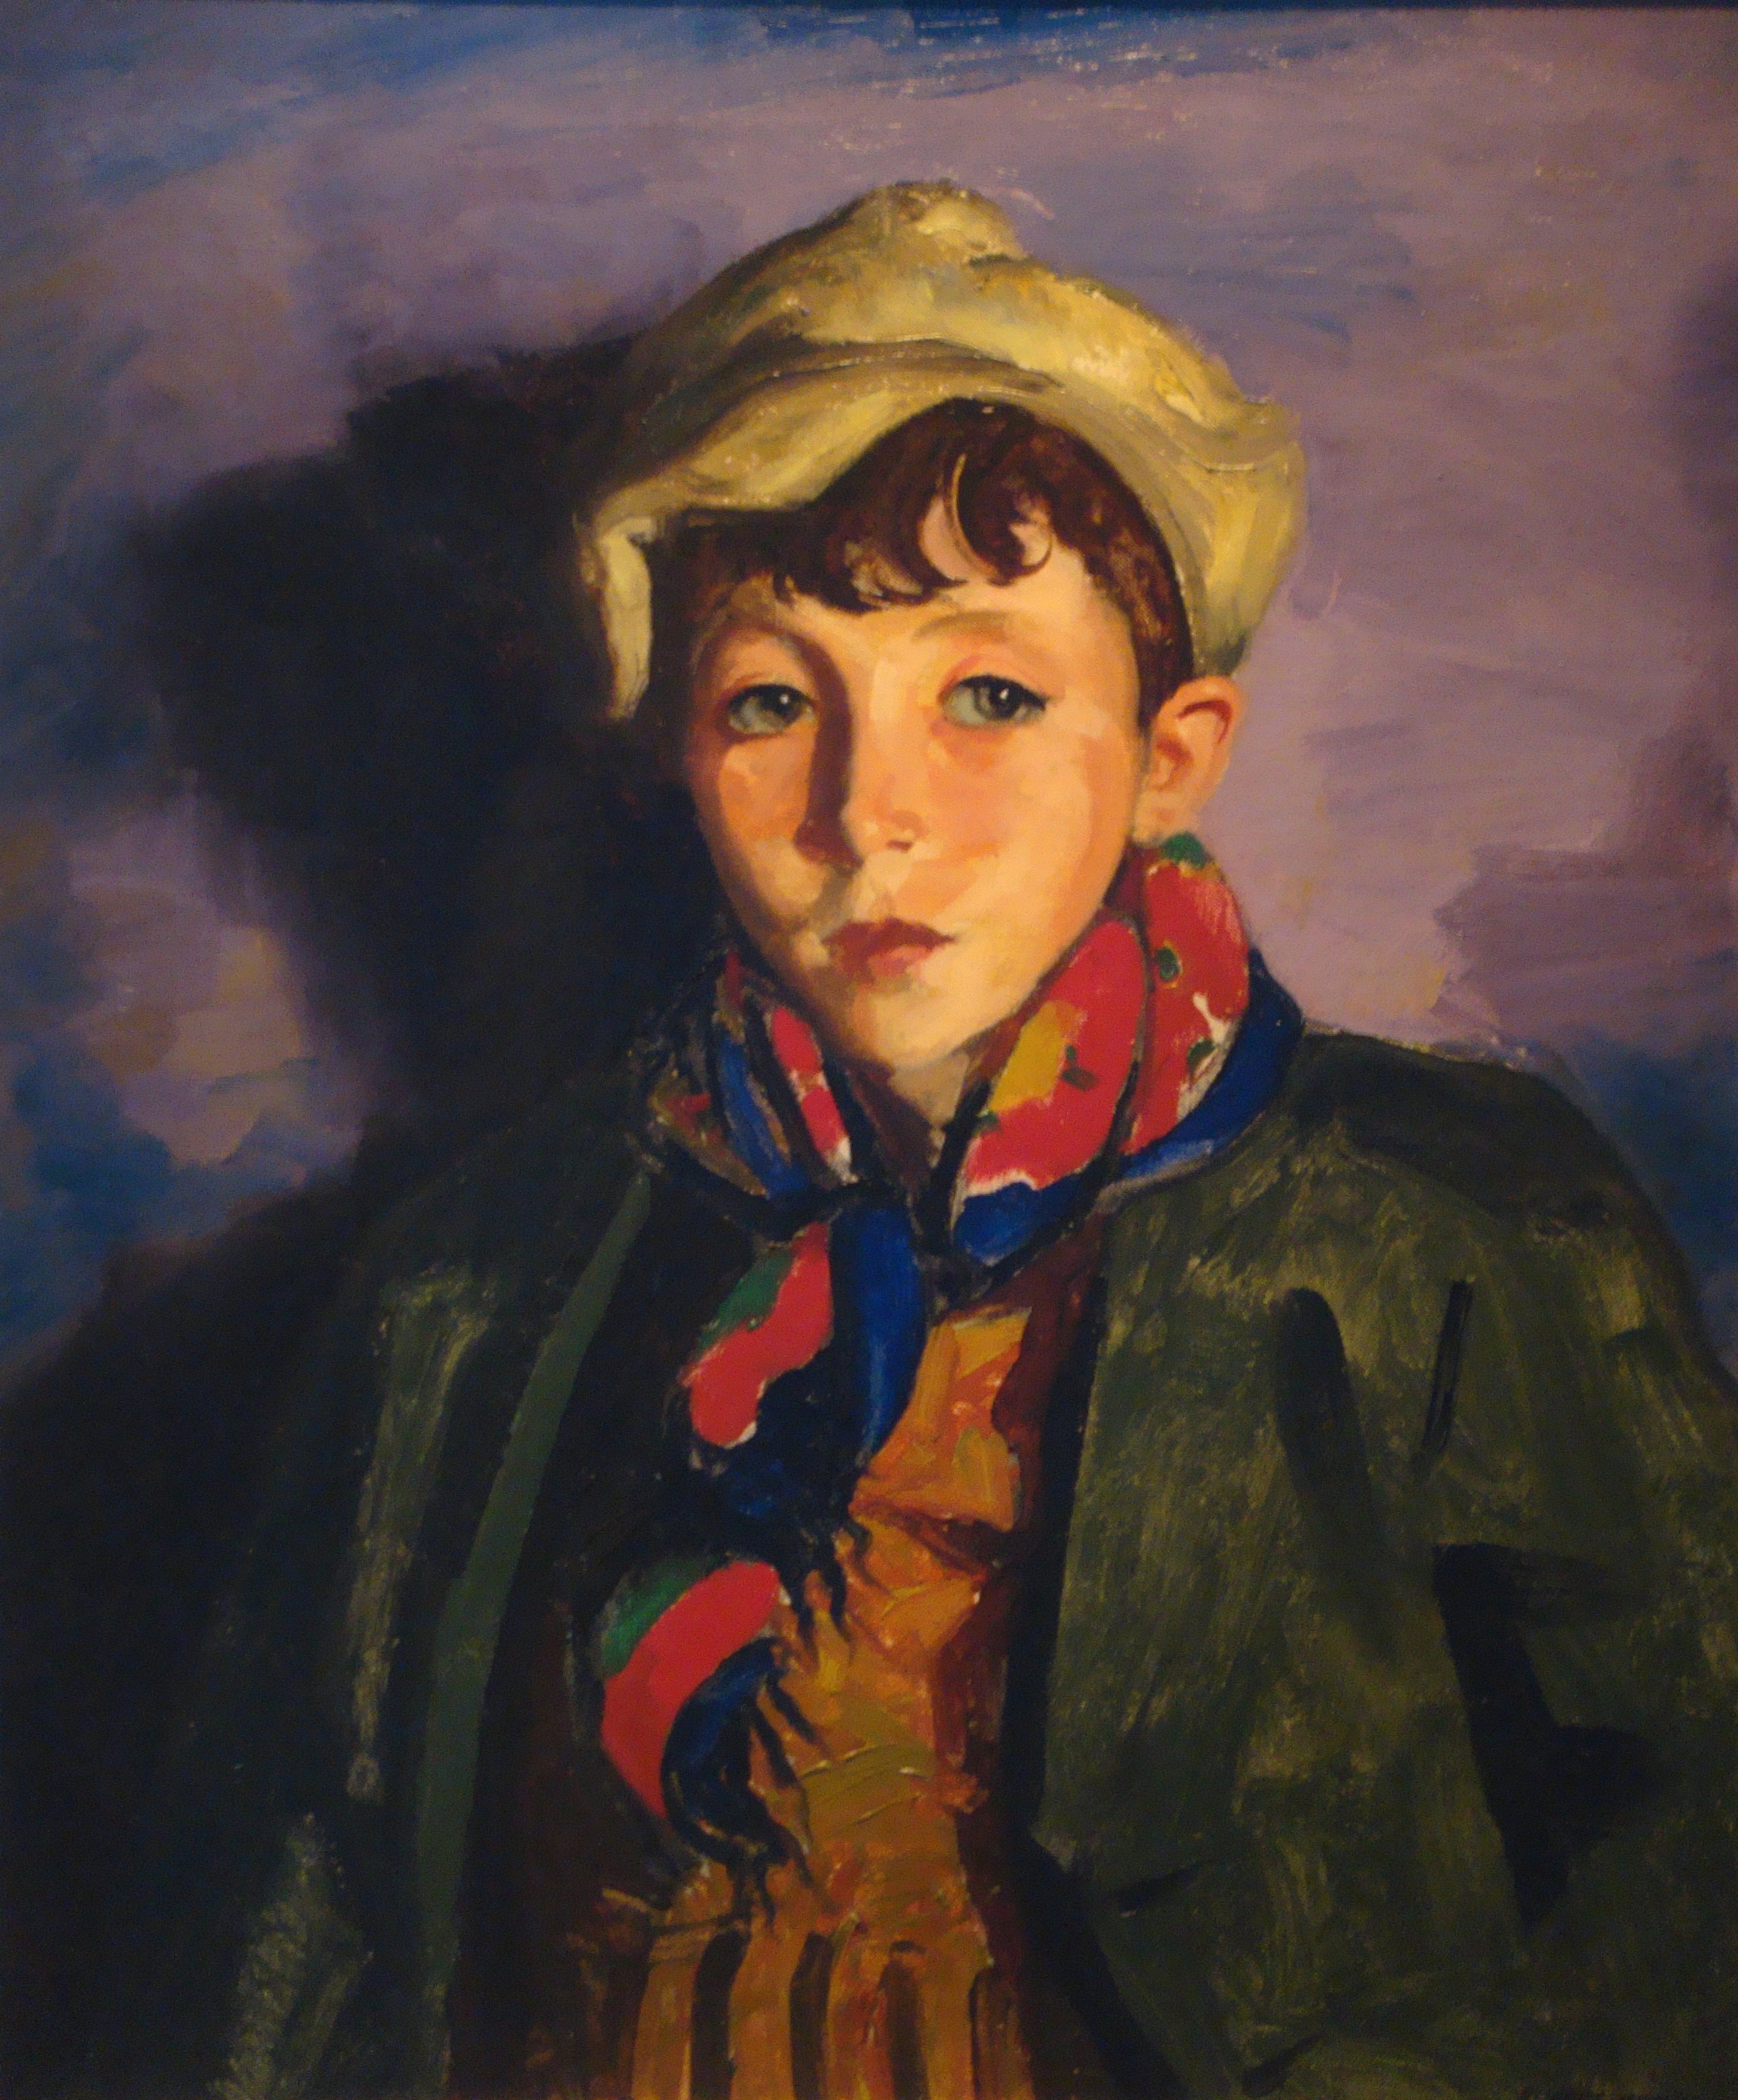 Painting of a small boy